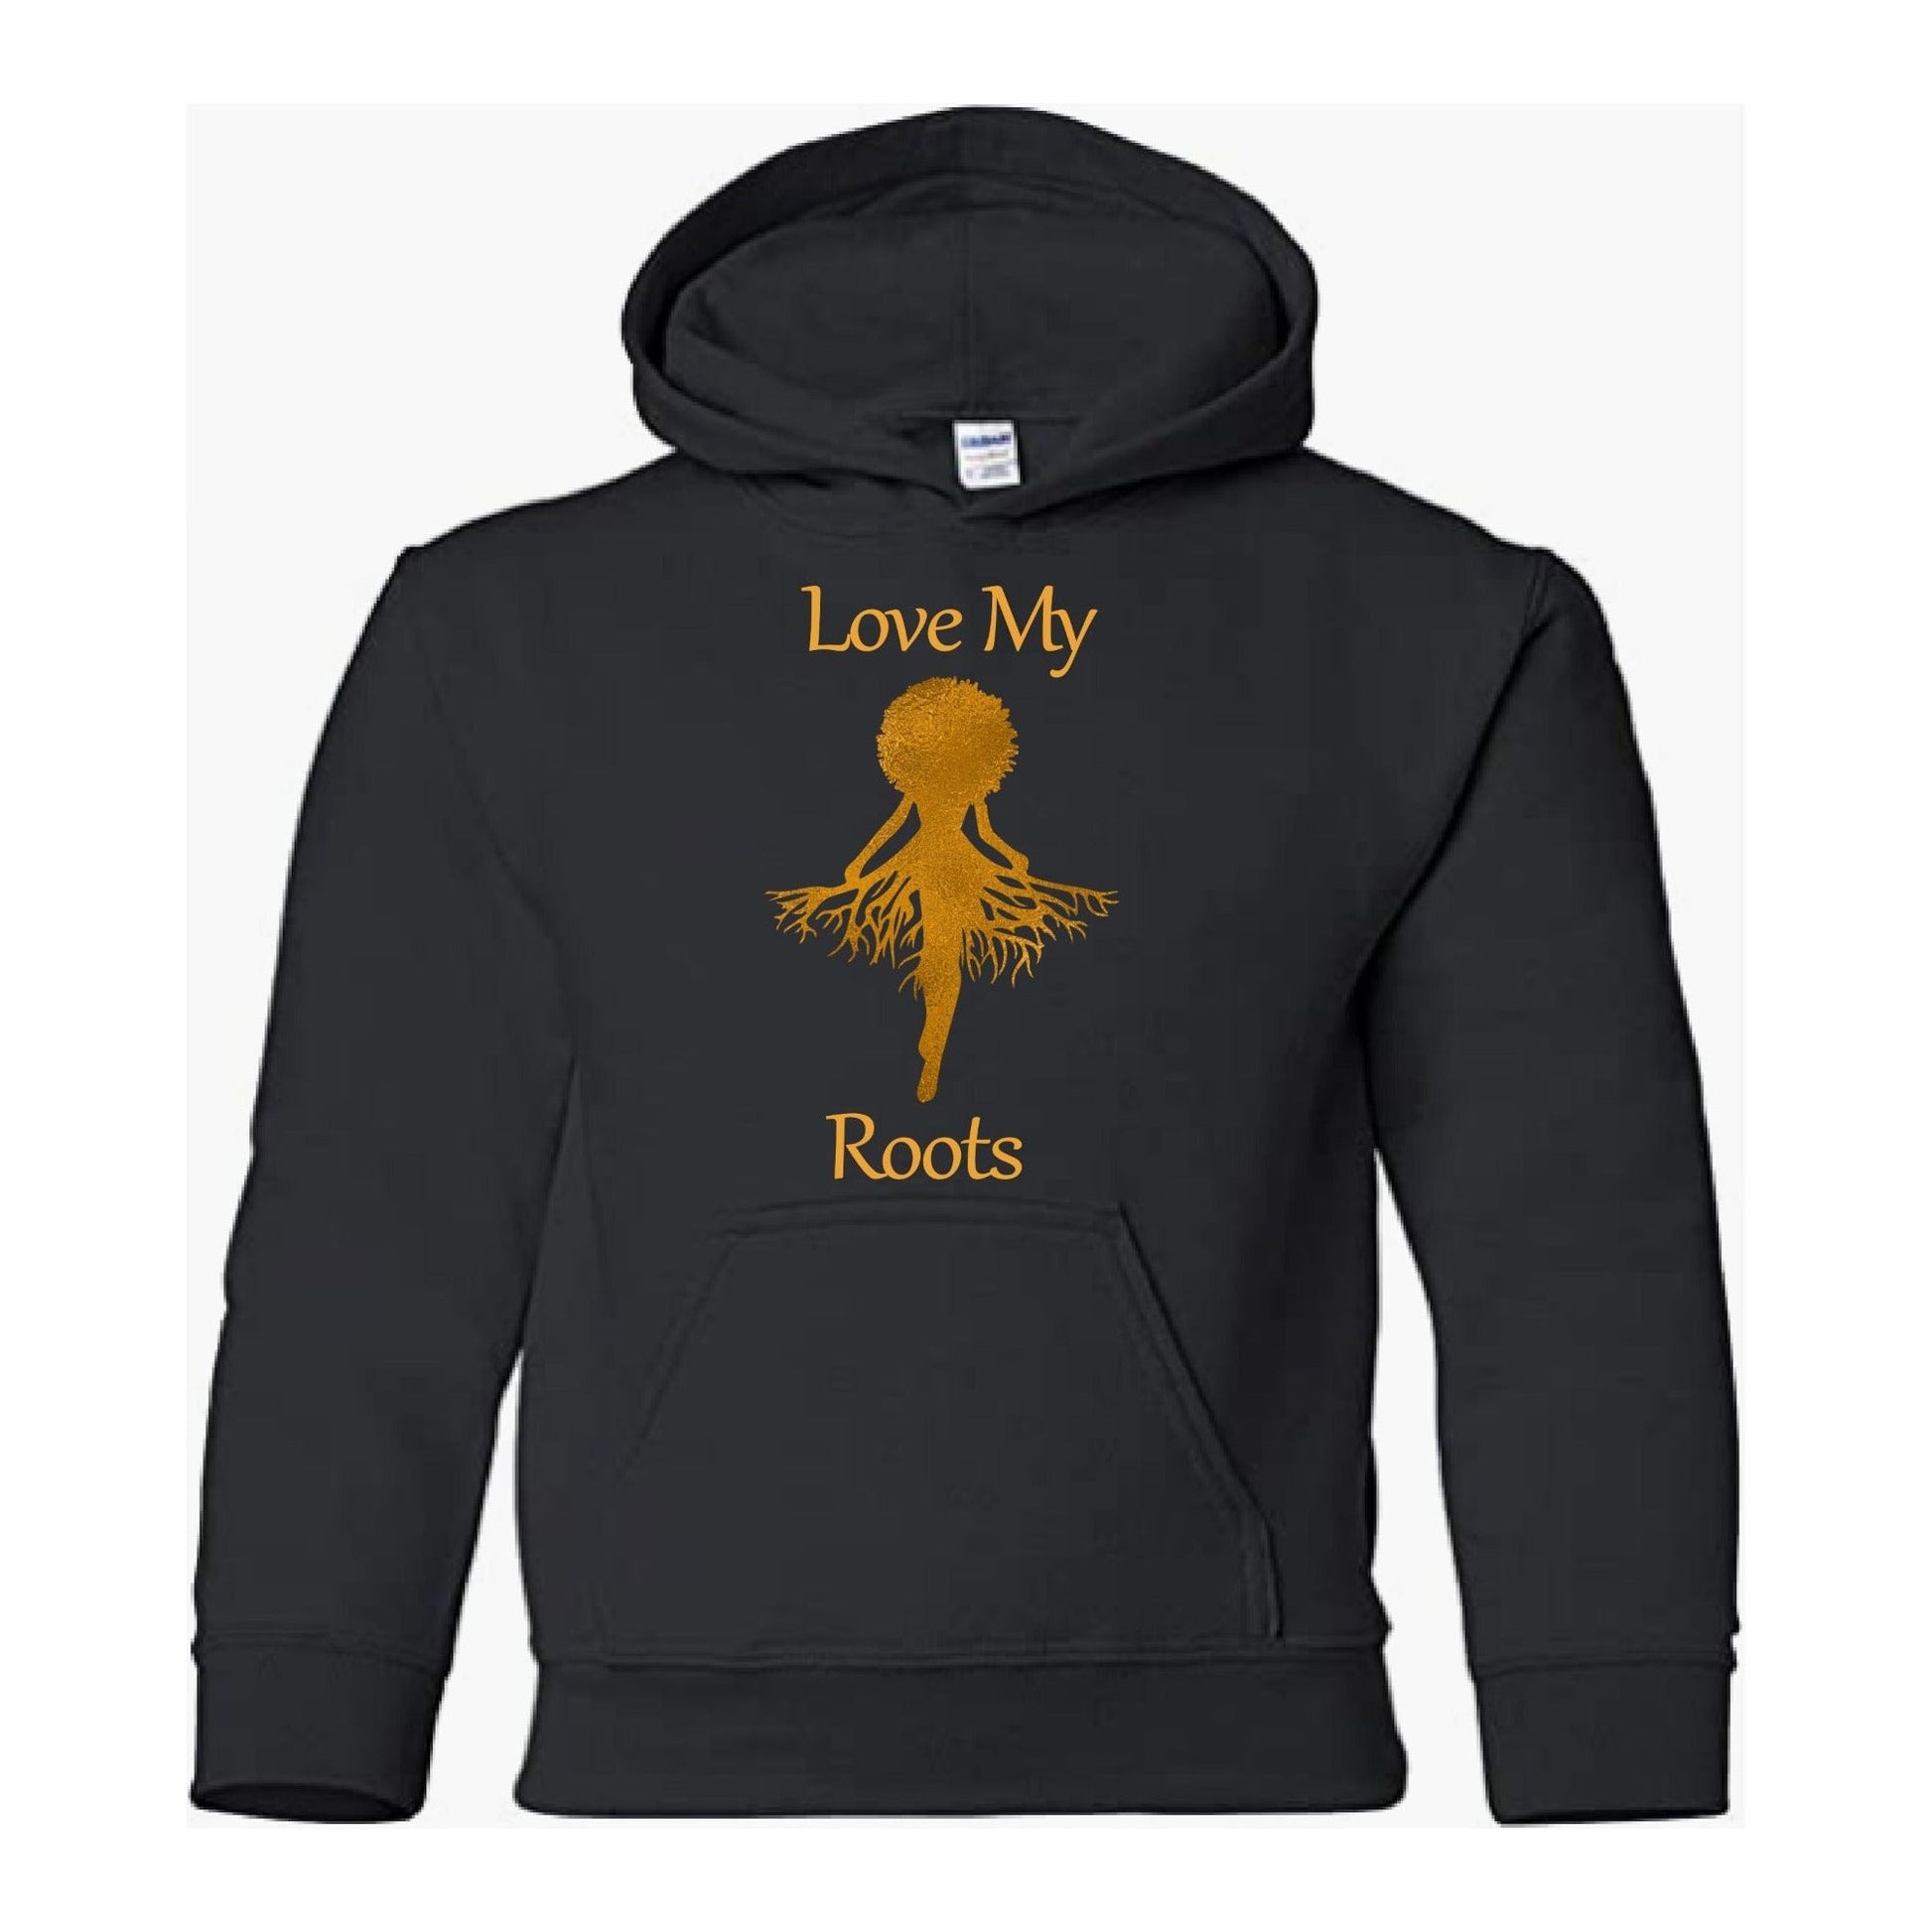 Love My Roots Gold Glitter-Black Hoodie